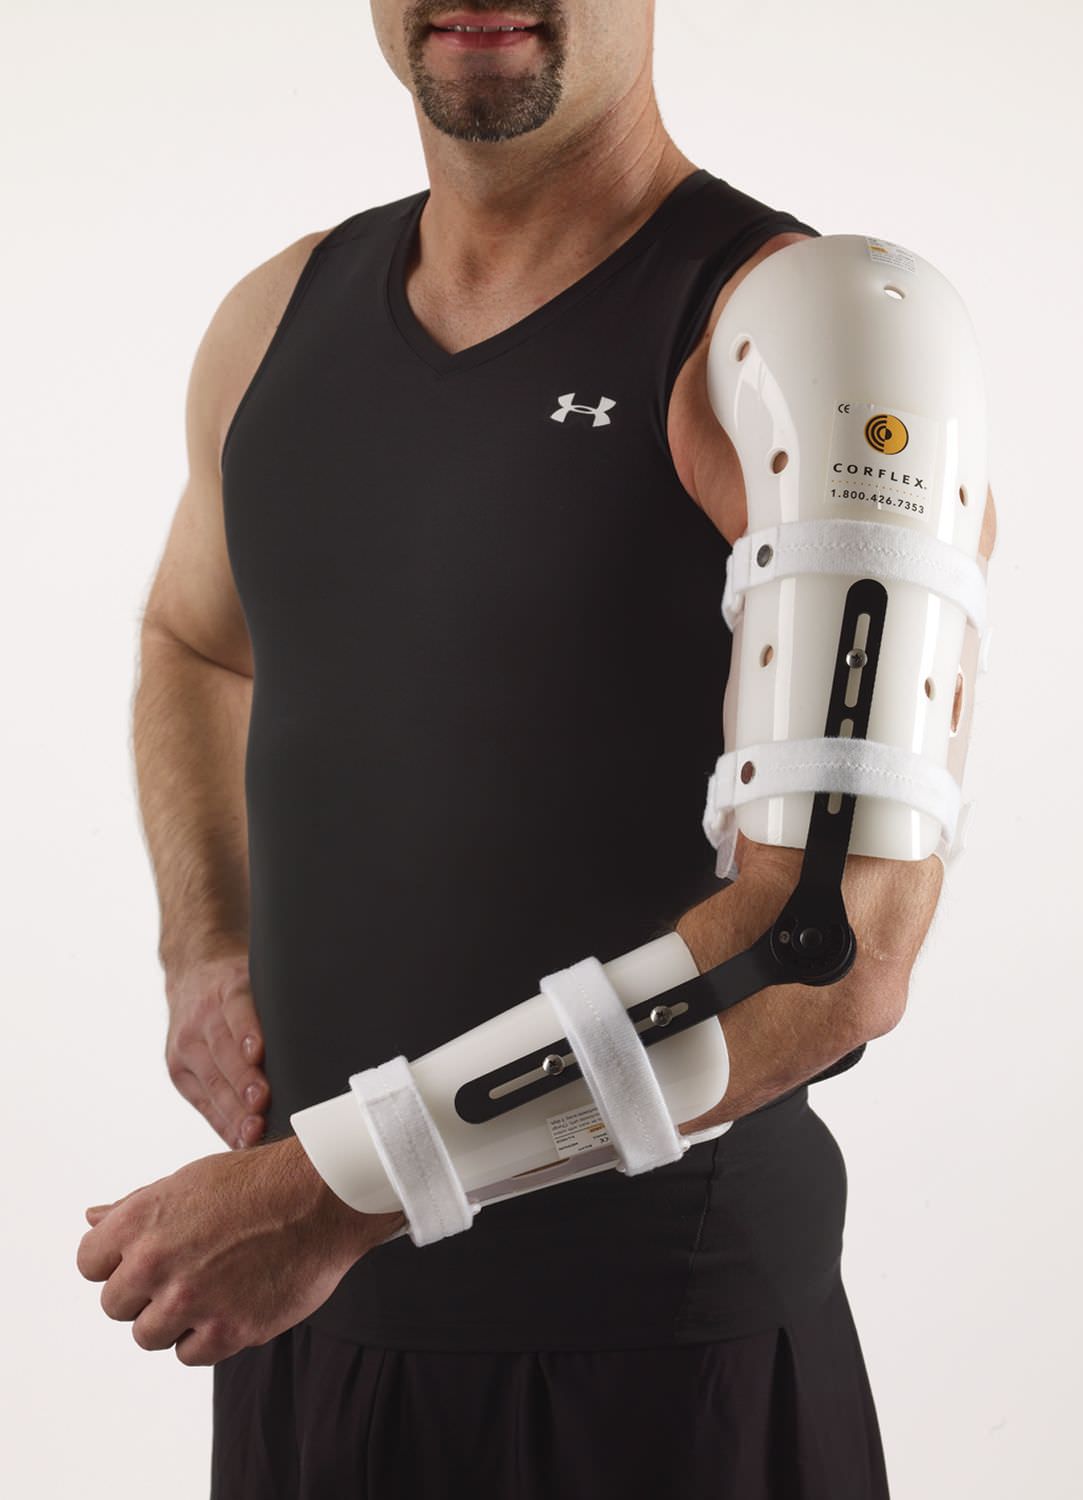 Elbow orthosis (orthopedic immobilization) / articulated 37-2201 / 37-2202 / 37-2203 / 37-2211 / 37-2212 / 37-2213 Corflex